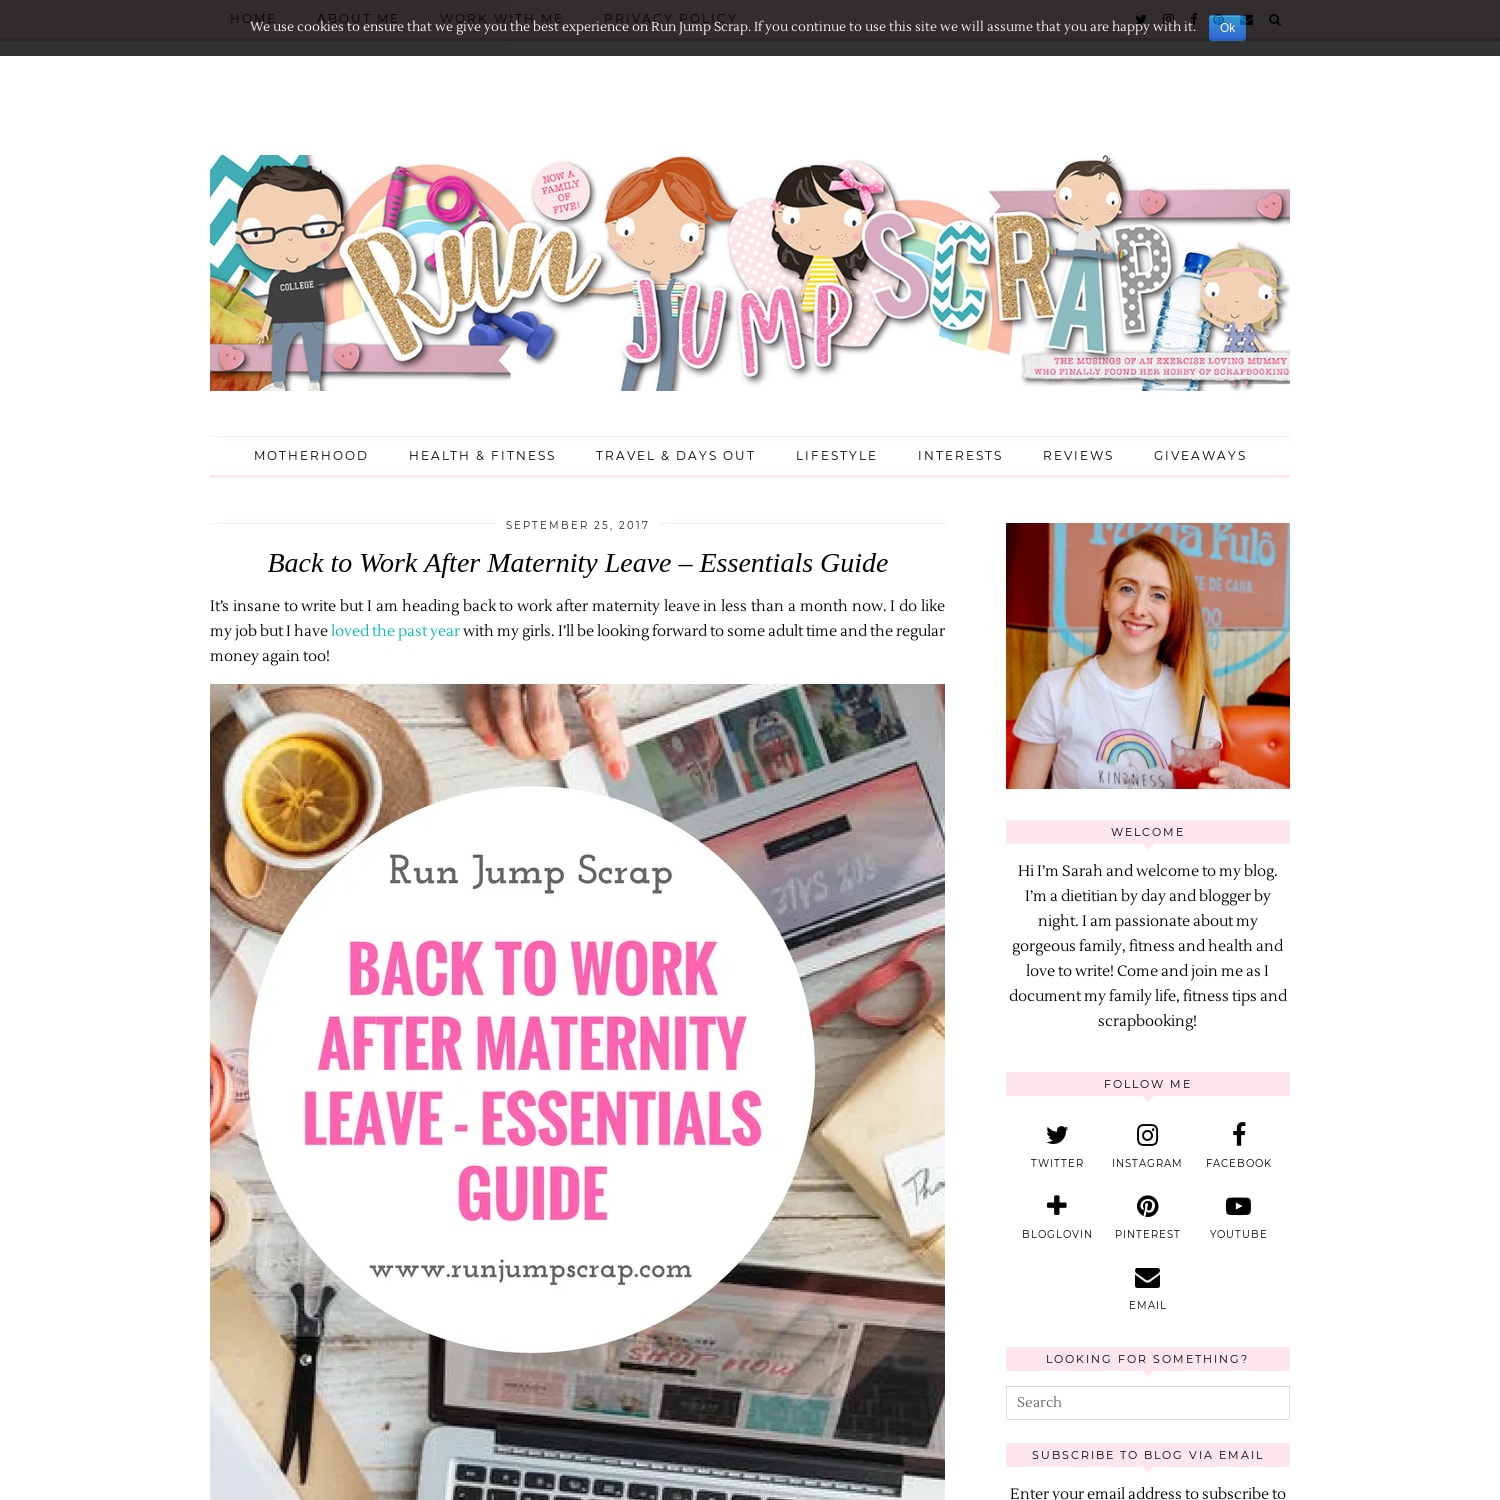 Back to Work After Maternity Leave - Essentials Guide